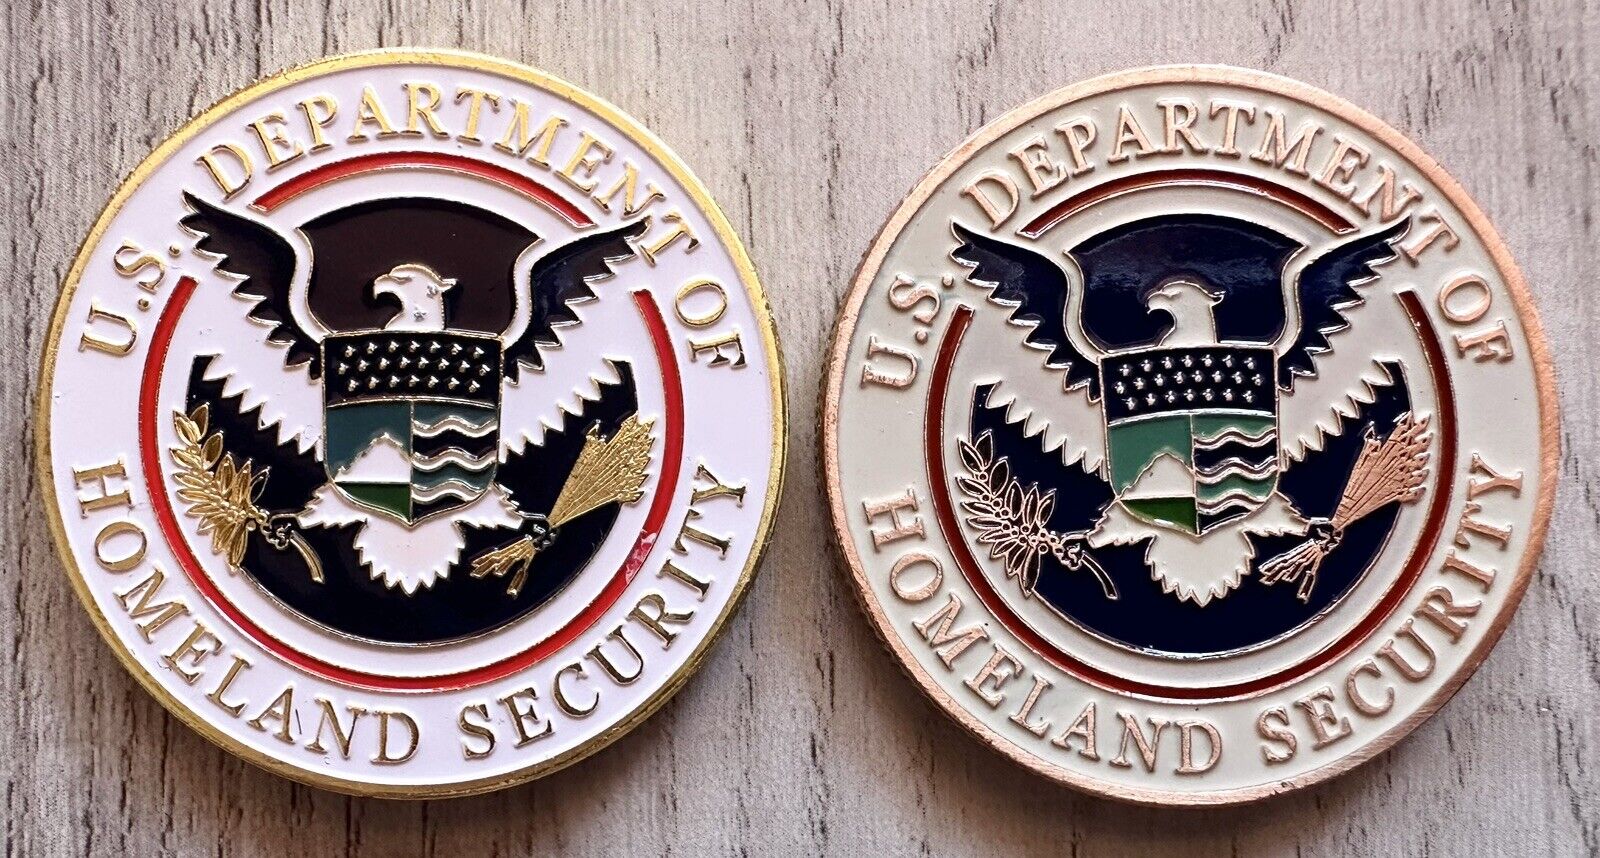 2 pcs Home land Security Challenge Coin (gold and Bronze)